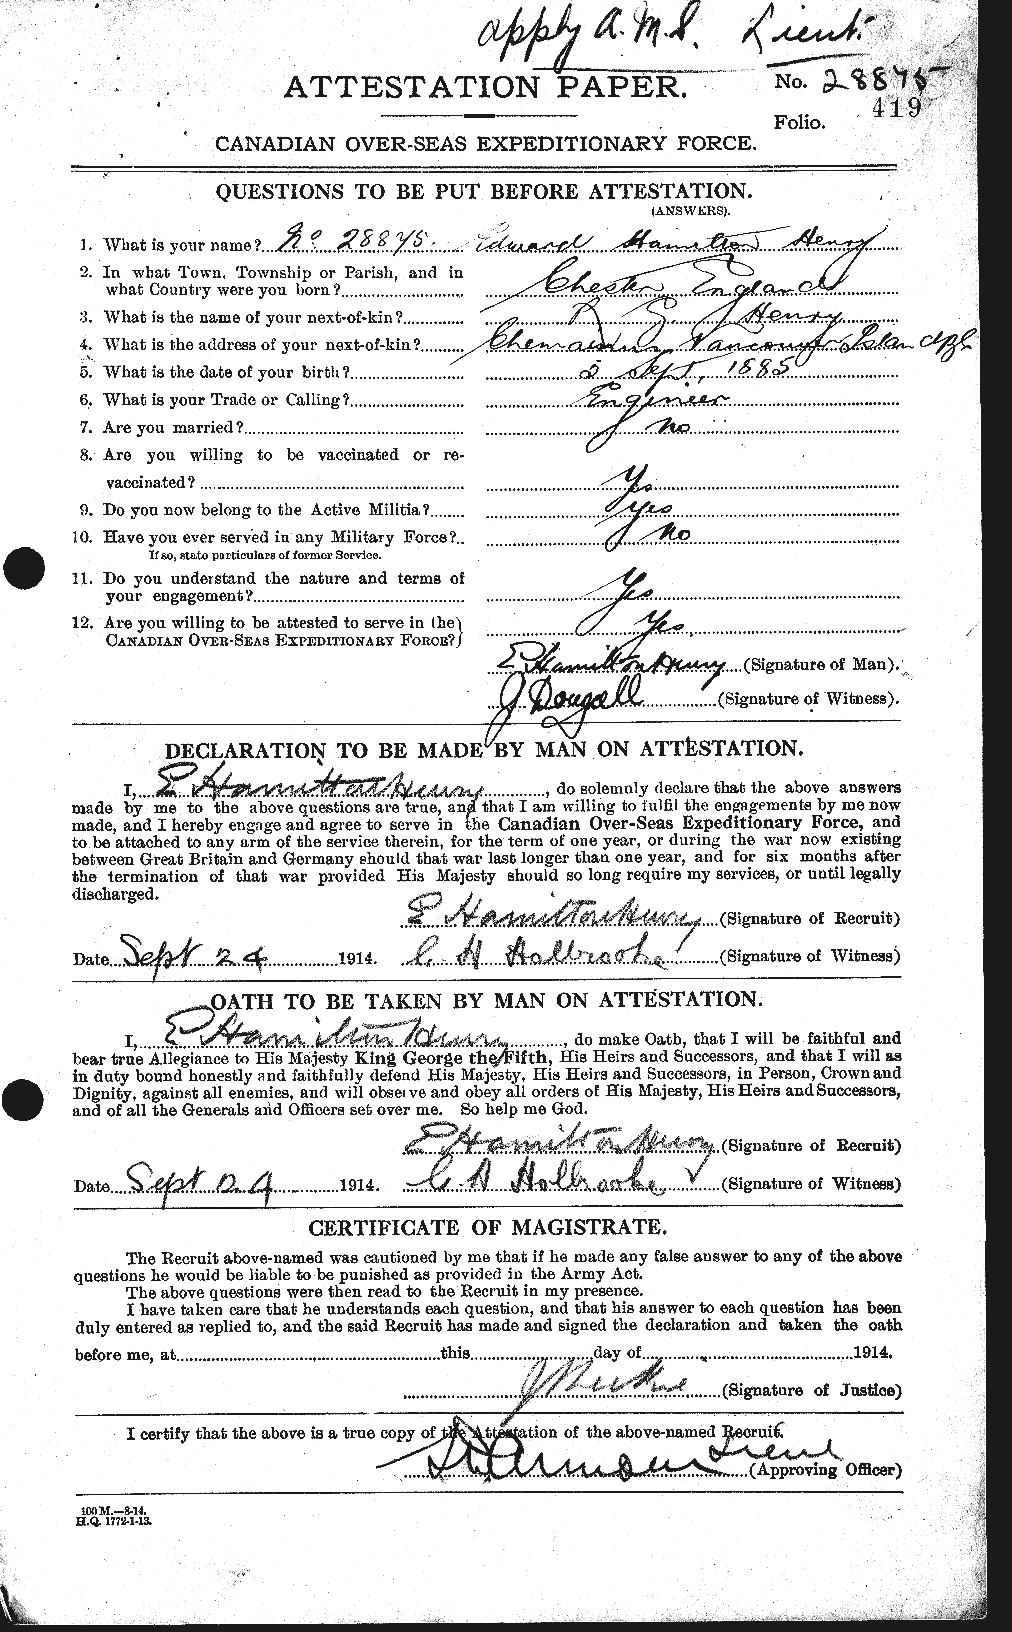 Personnel Records of the First World War - CEF 392837a